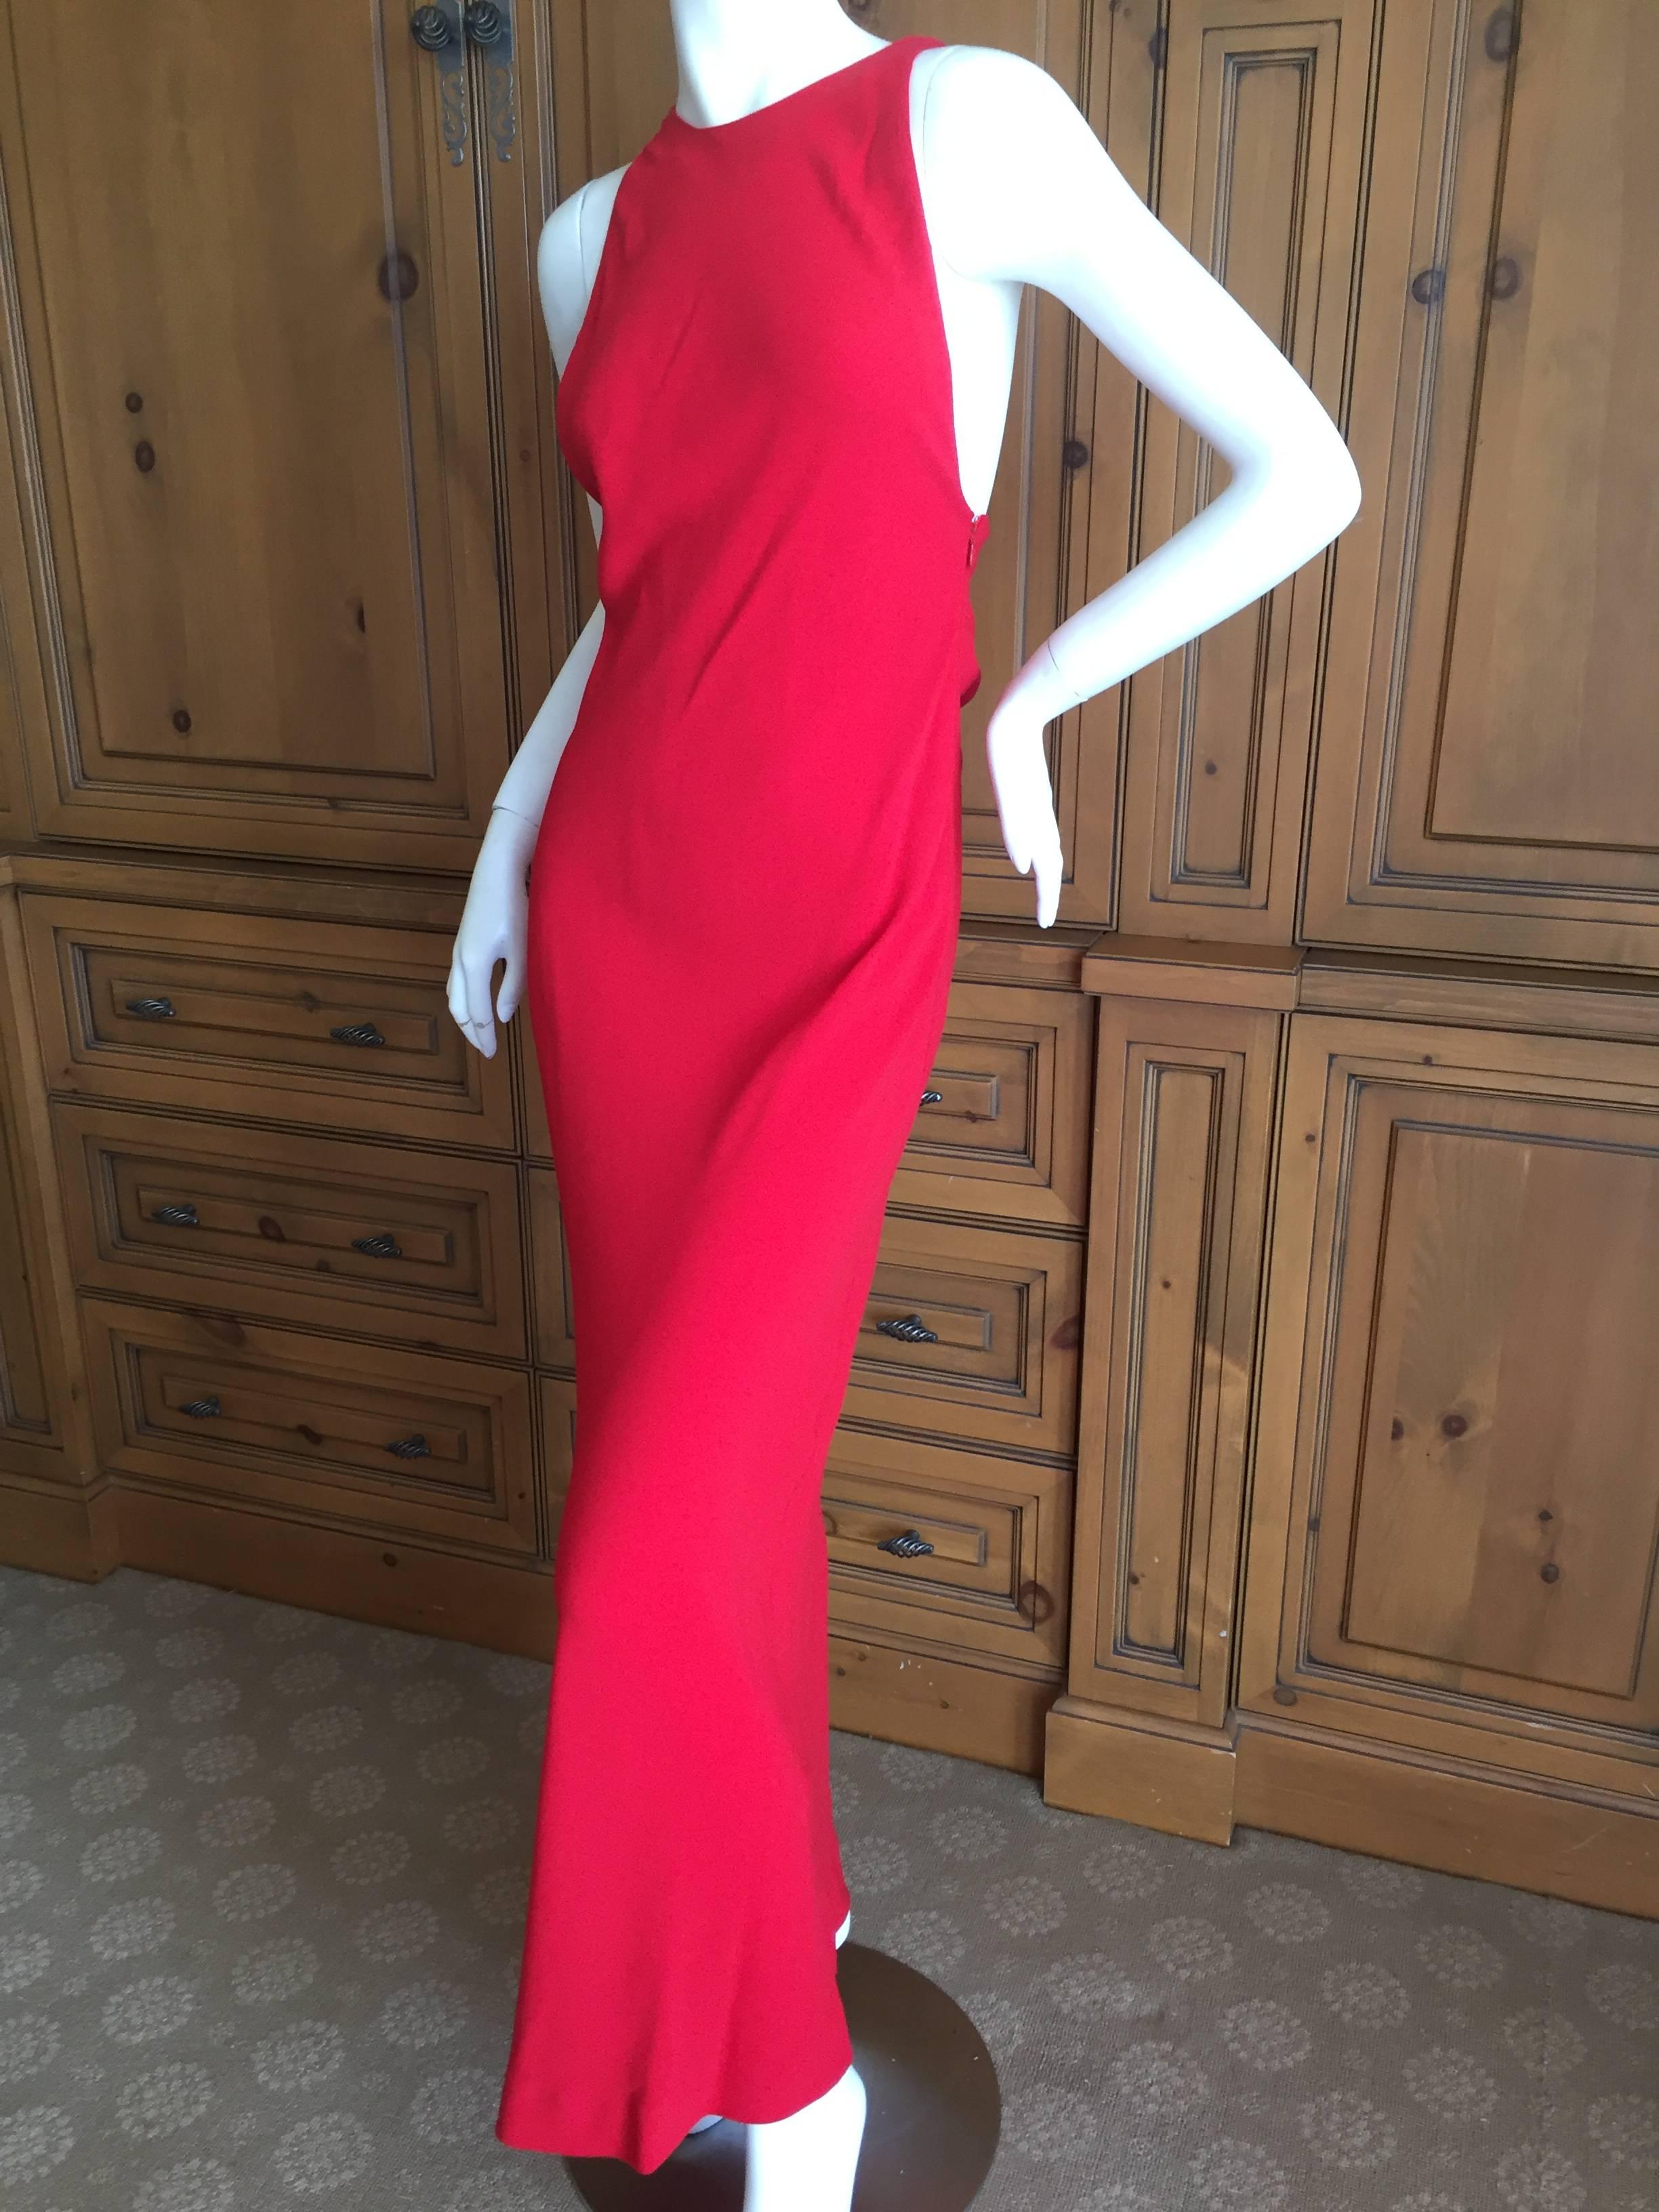 Sultry red evening dress from Yves Saint Laurent Rive Gauche circa 1990.
This is so modern and chic, a perfect Valentine dress .
Low cut arms, with a very sexy back, this is Yves final era at his best.
Size 38 
Bust 34